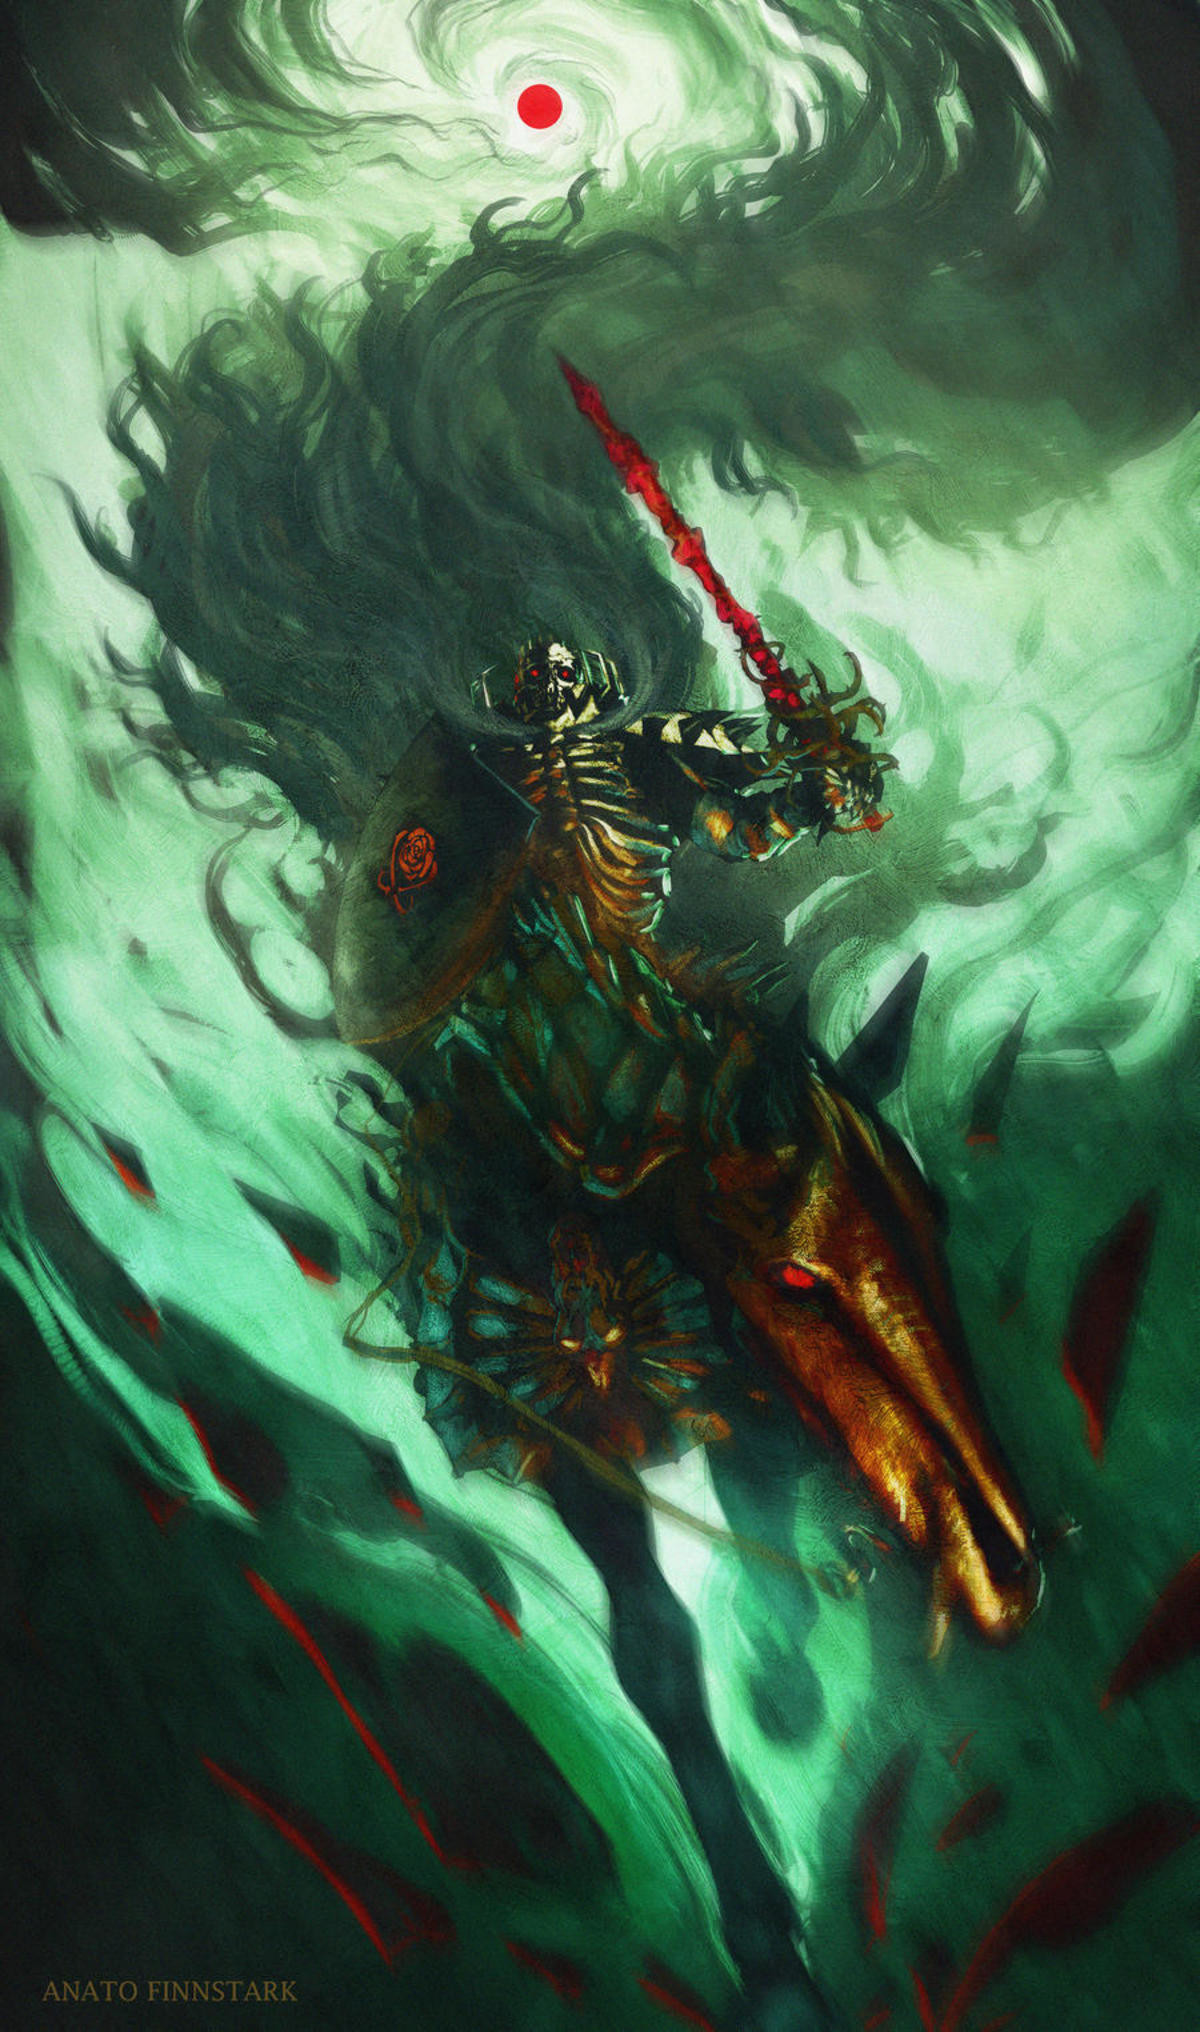 GUESS WHO'S BACK - BACK AGAIN. Art by: Anato Finnstark .. Berserk has a good handle on 1-10 storytelling tension. 1 would be guts just quietly traveling the land, 10 is an apocalyptic event. Like Cable from X-men, when